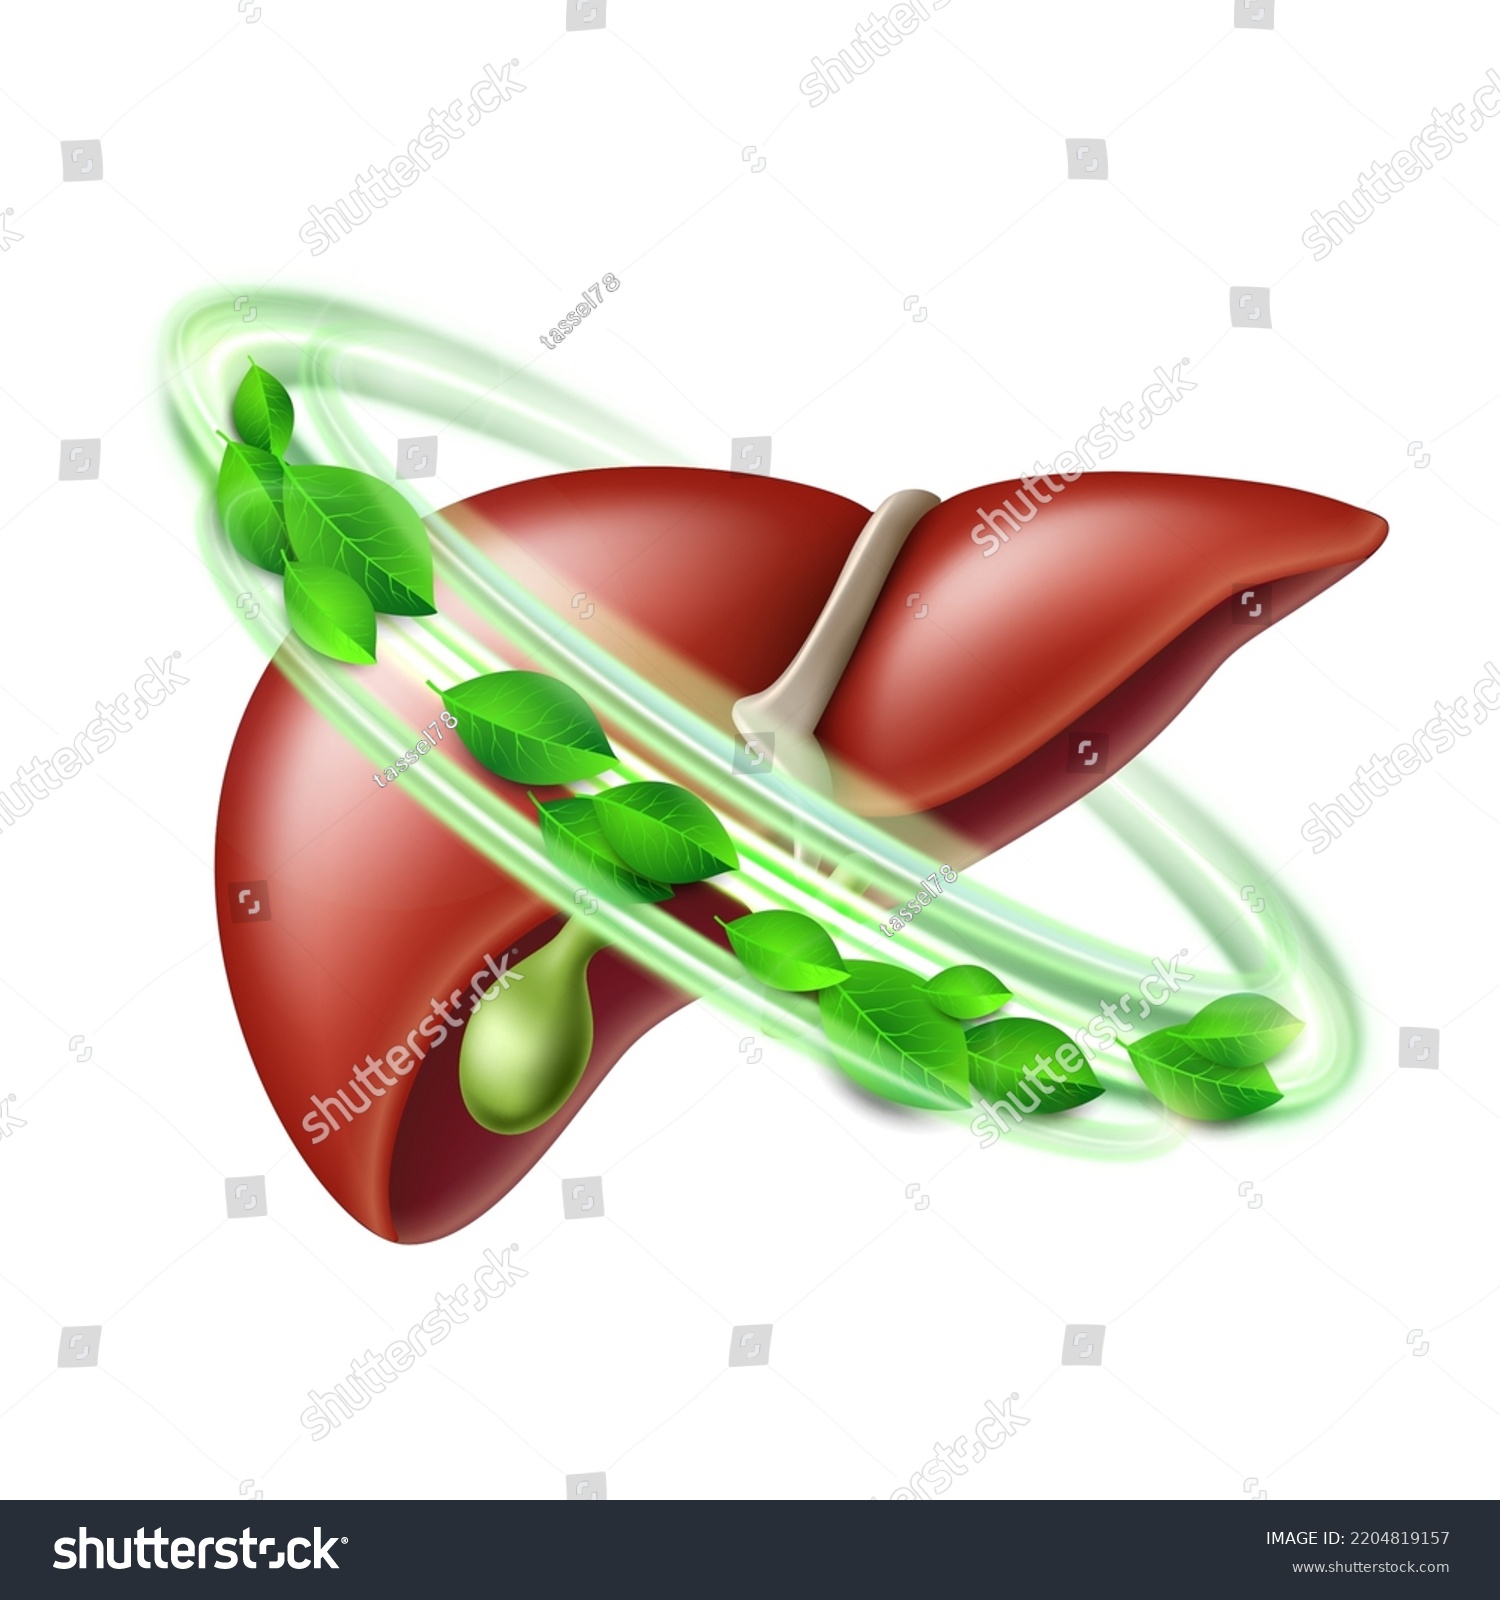 SVG of Healthy human liver in green protective circle with leaves. Health care and healthy food concept. Vector illustration isolated on white background svg